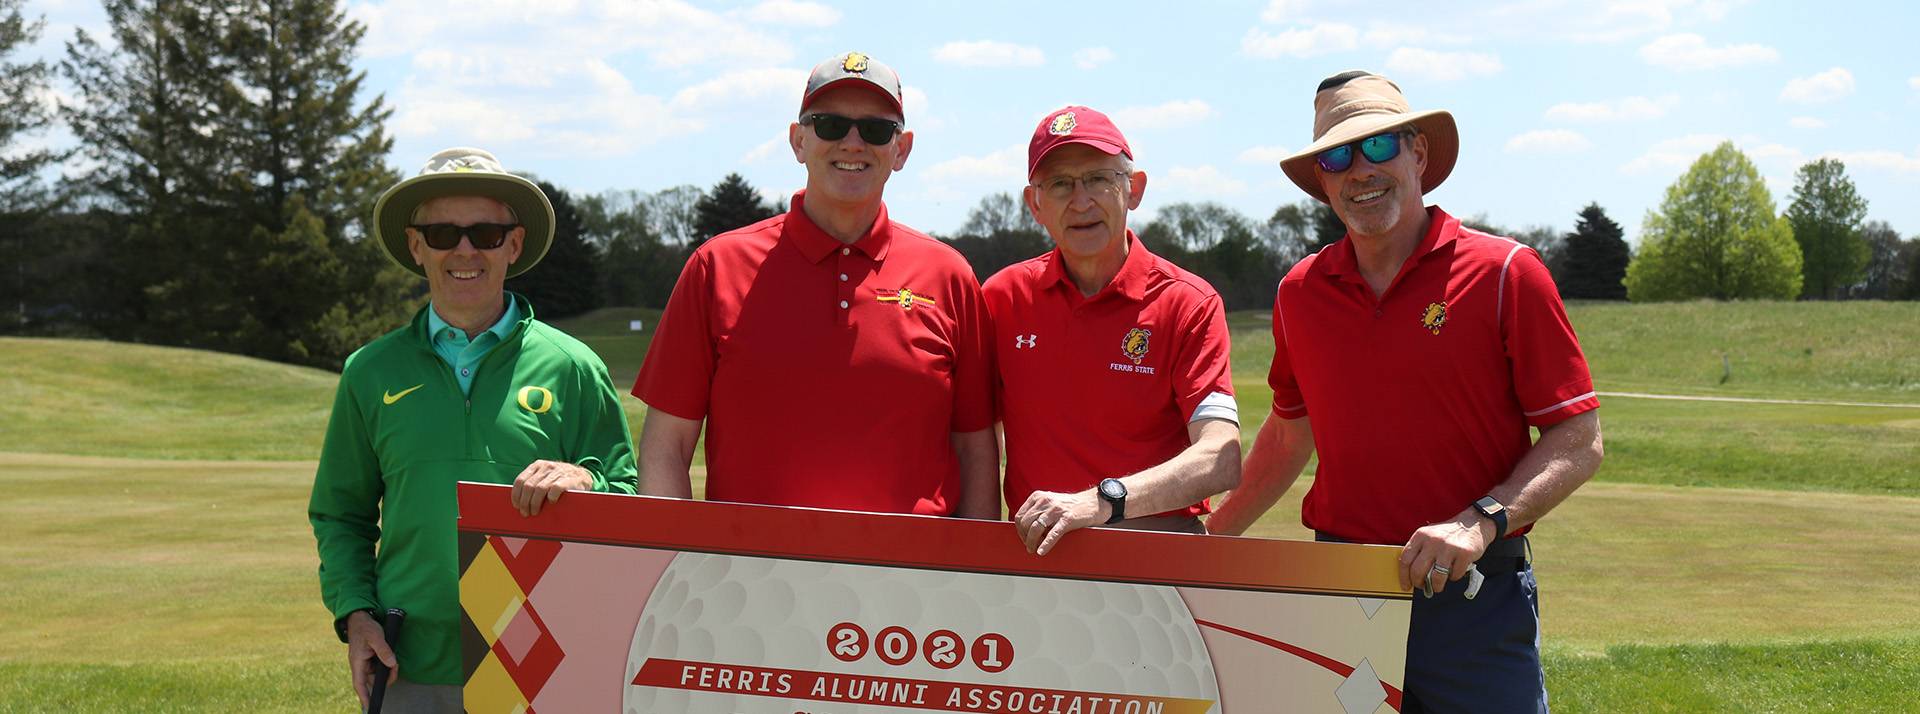 President Eisler and other golfers posing for a picture at the 2021 Ferris State University Alumni Association Golf Outing